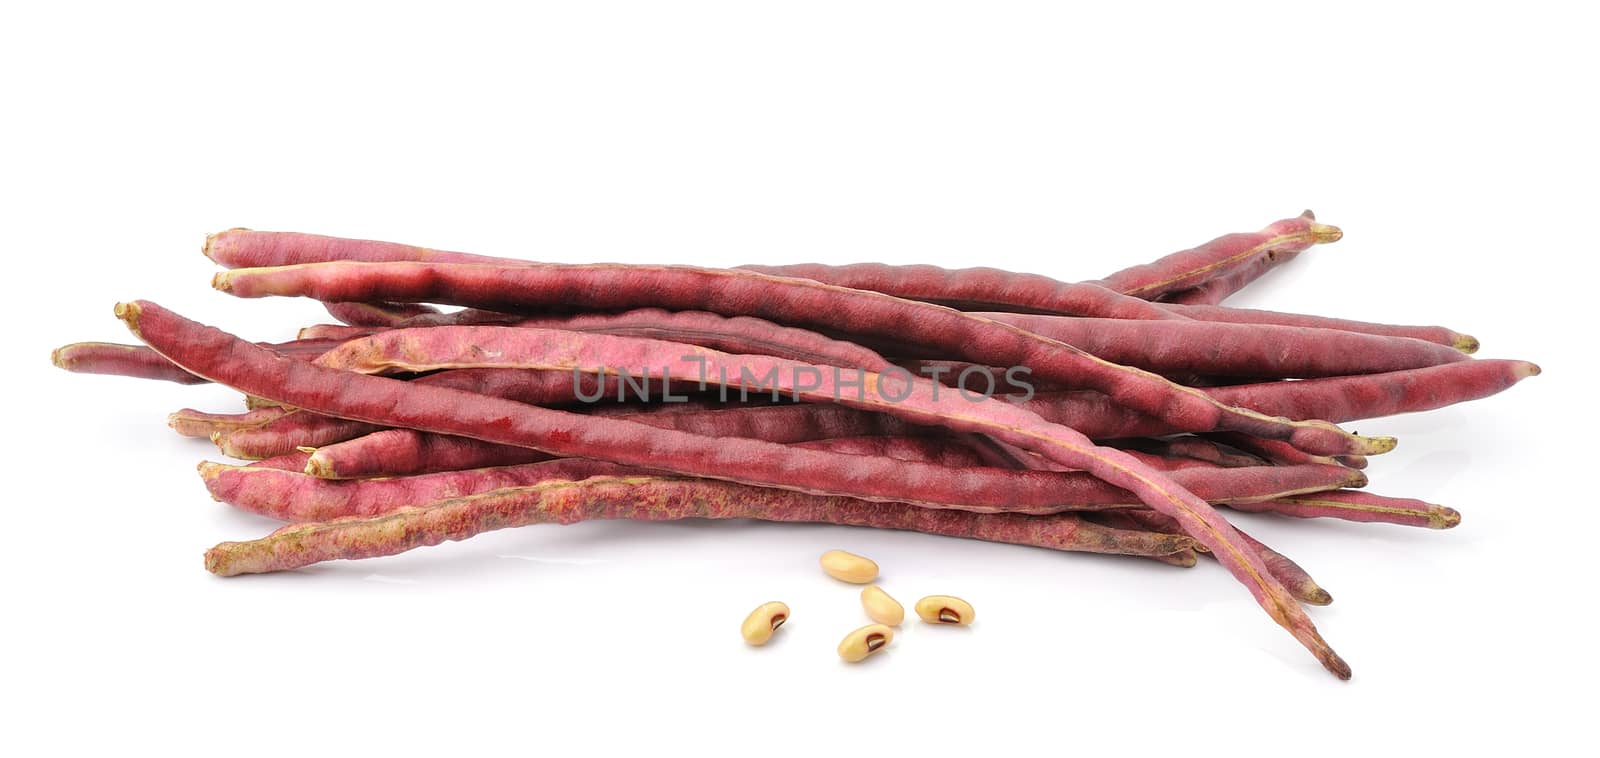 red beans on the white background.